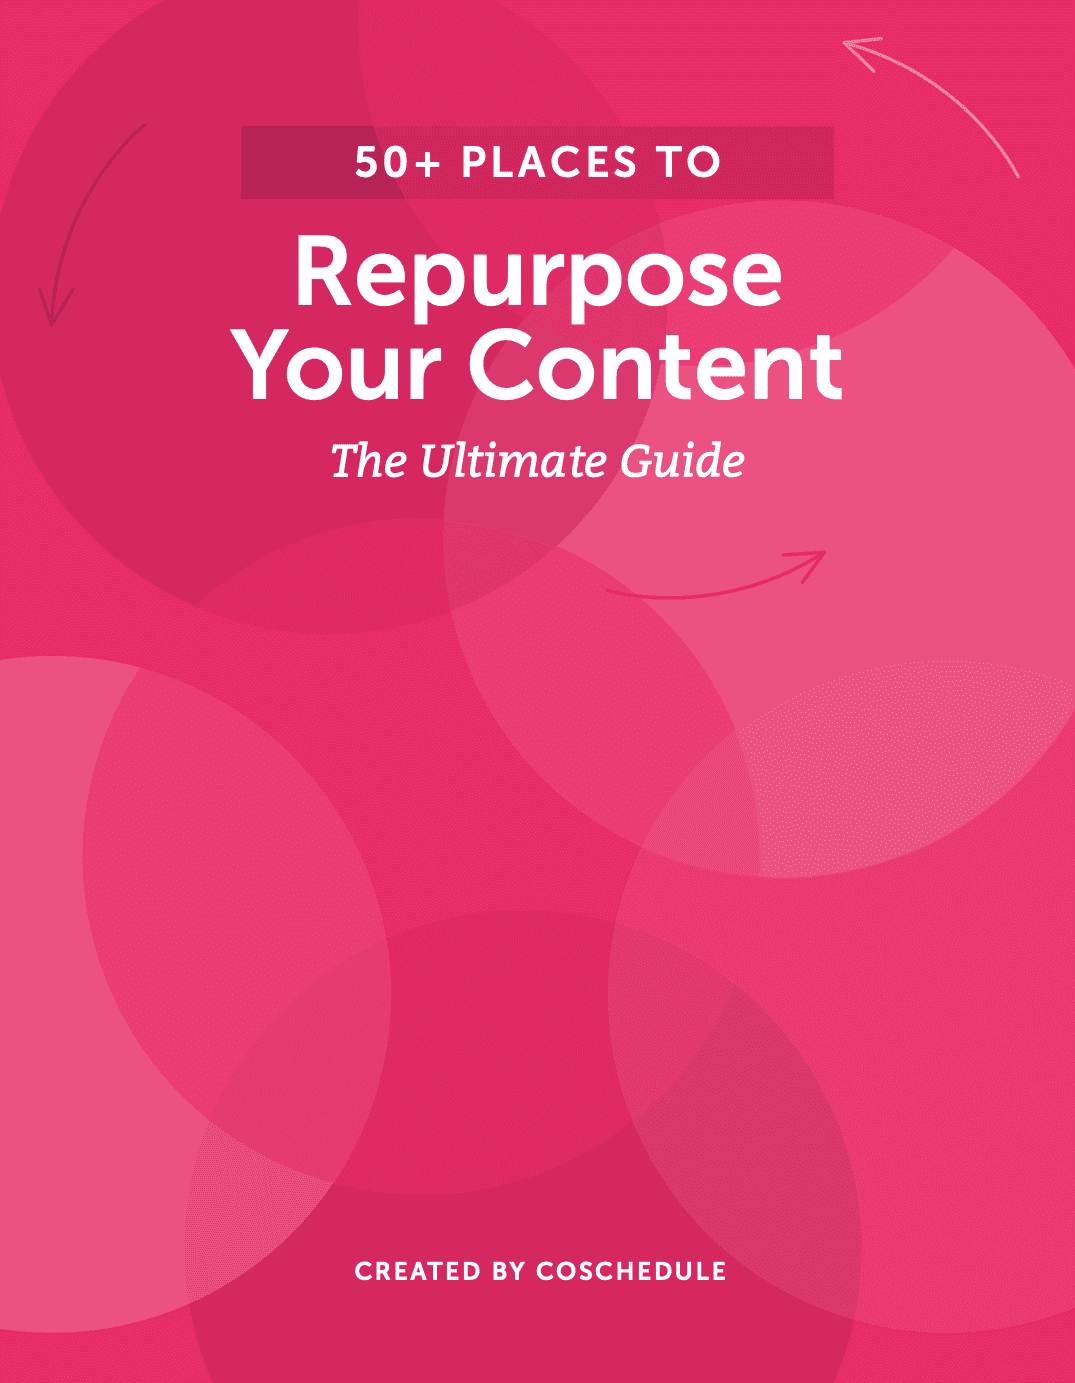 Cover page of a downloadable guide by Coschedule